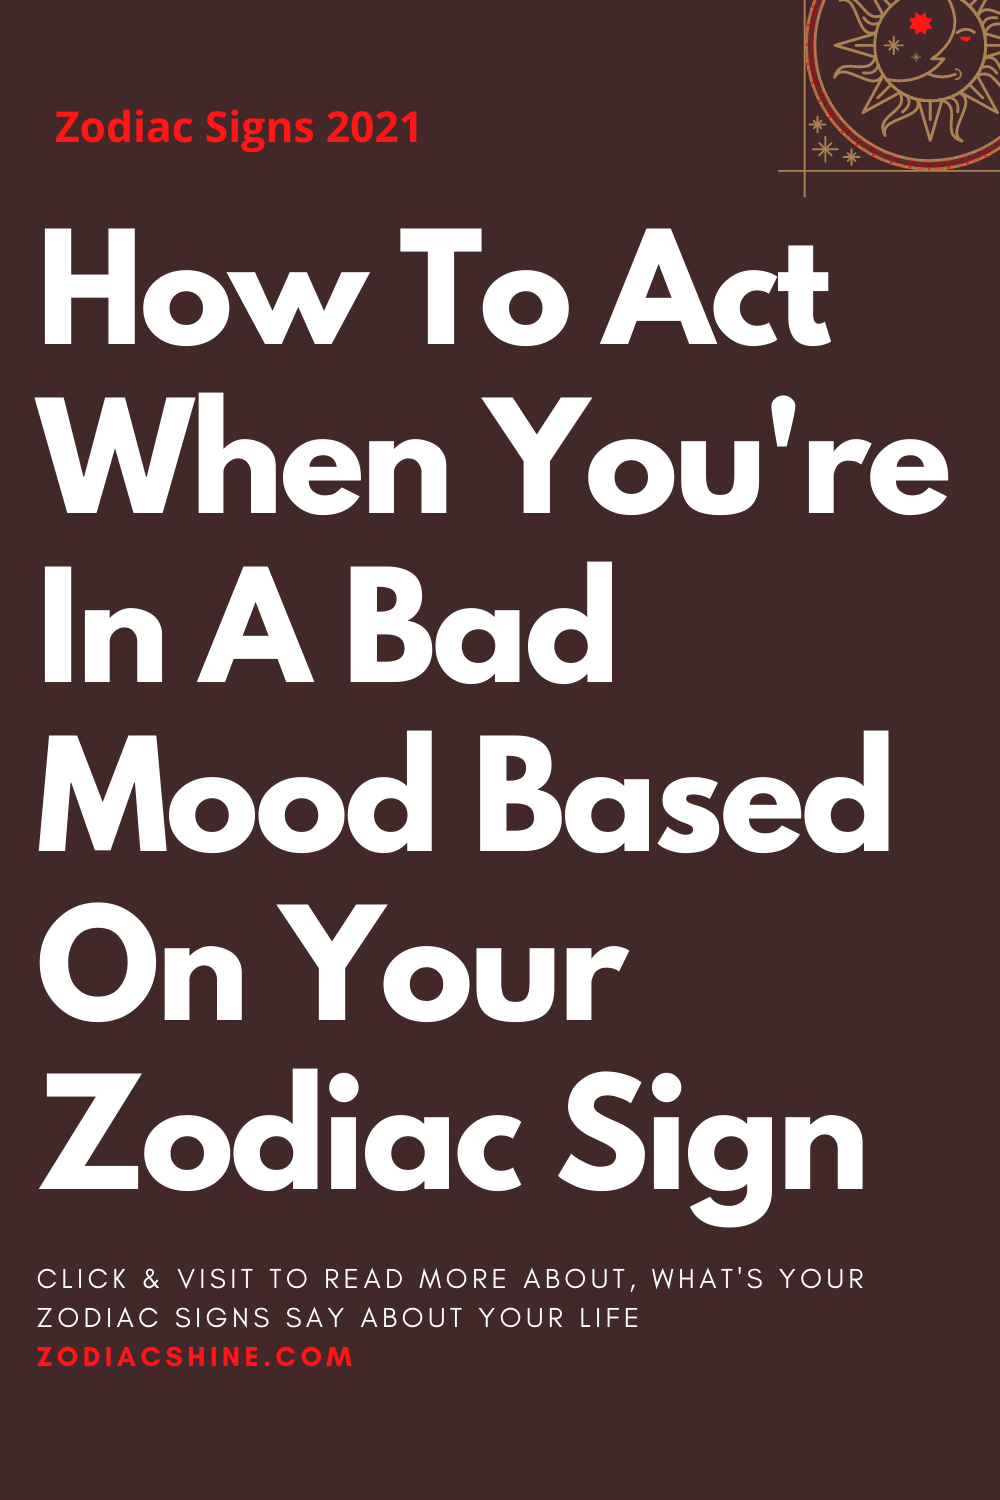 How To Act When You're In A Bad Mood Based On Your Zodiac Sign